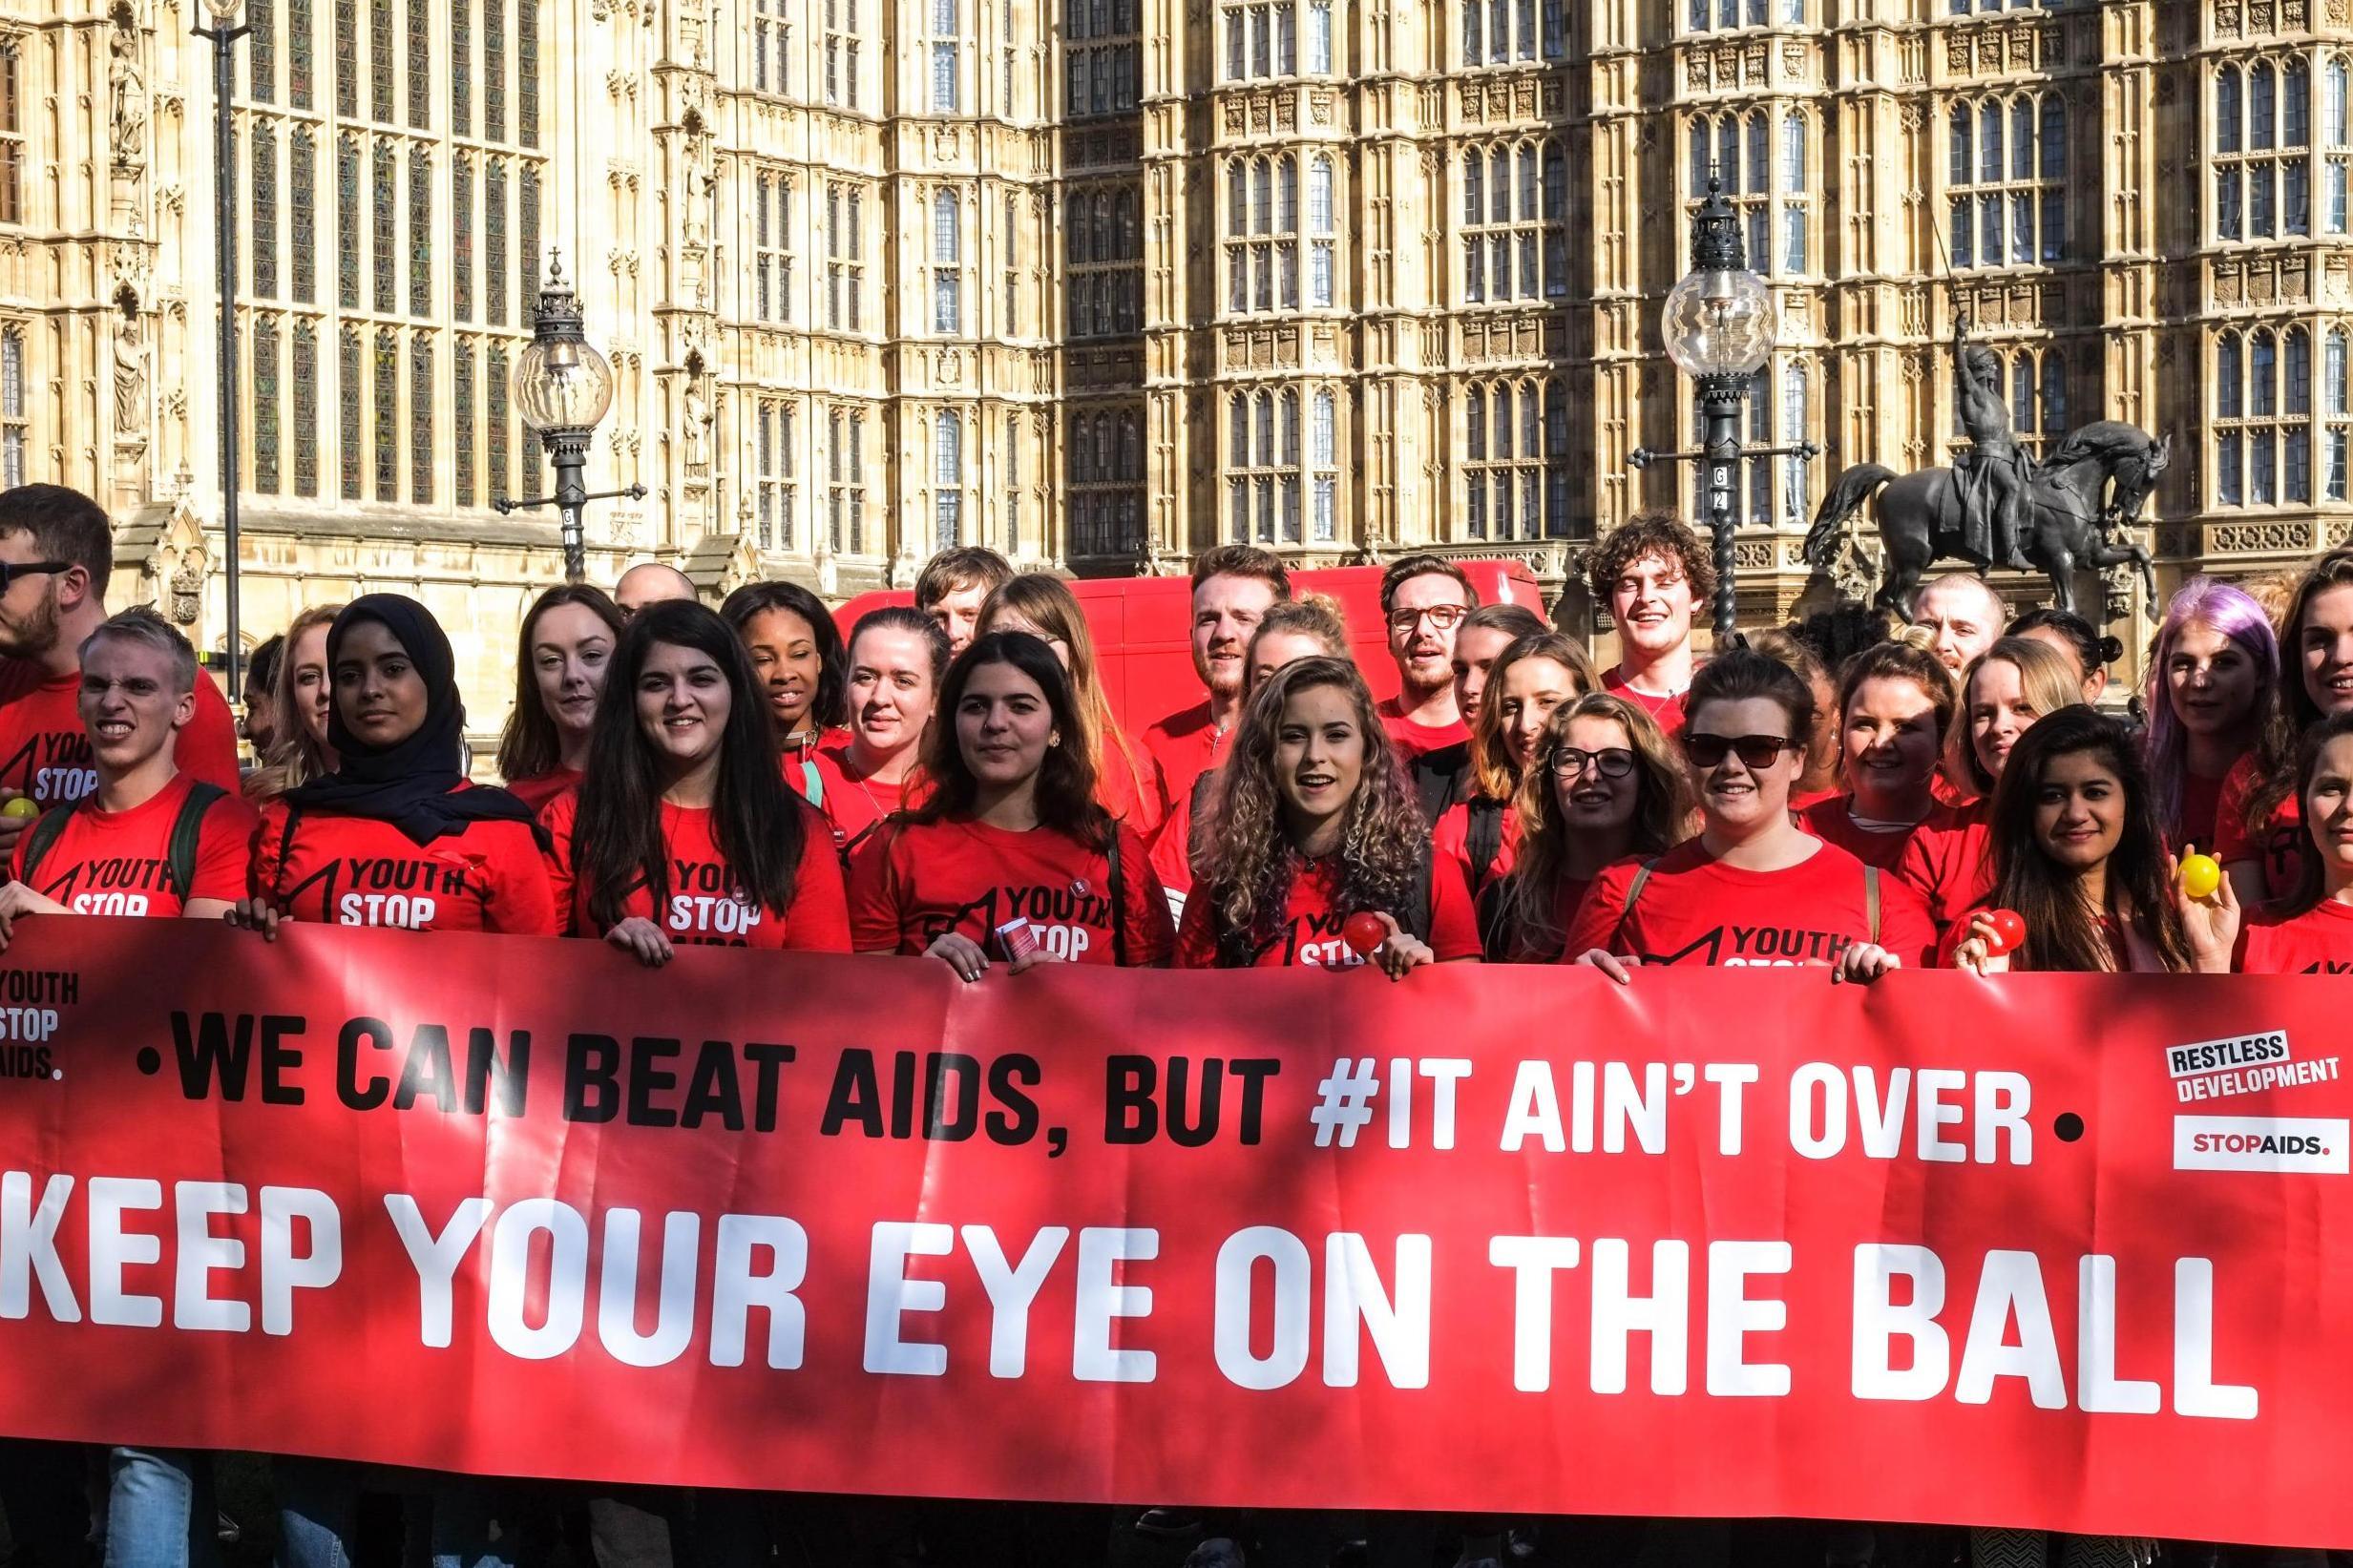 Raising Awareness: The Youth Stop Aids campaign outside Parliament. London is helping other cities to form an action plan